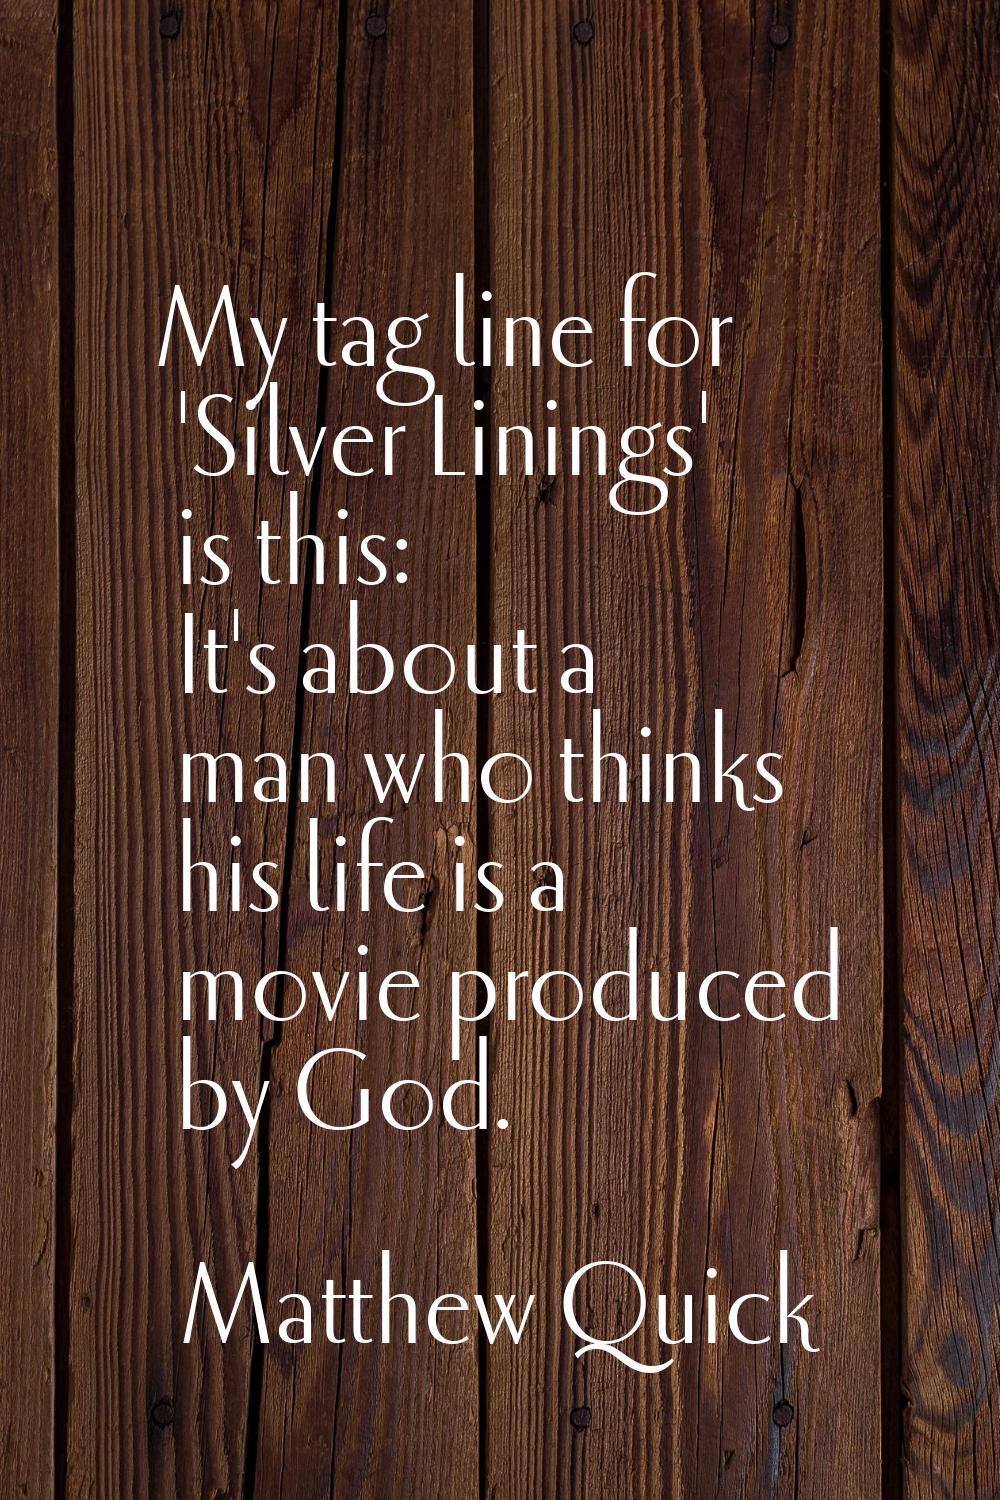 My tag line for 'Silver Linings' is this: It's about a man who thinks his life is a movie produced 